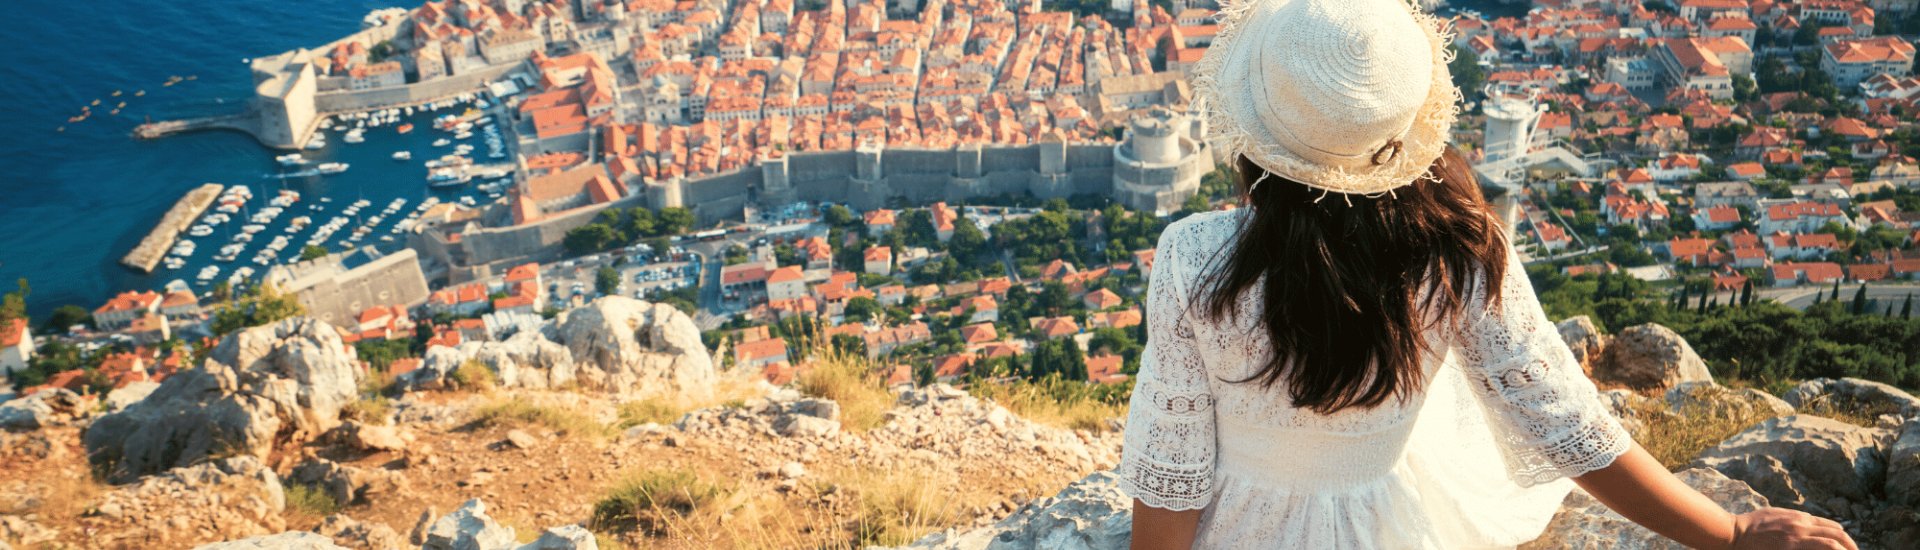 woman enjoying the view over dubrovnik with a birds eye view